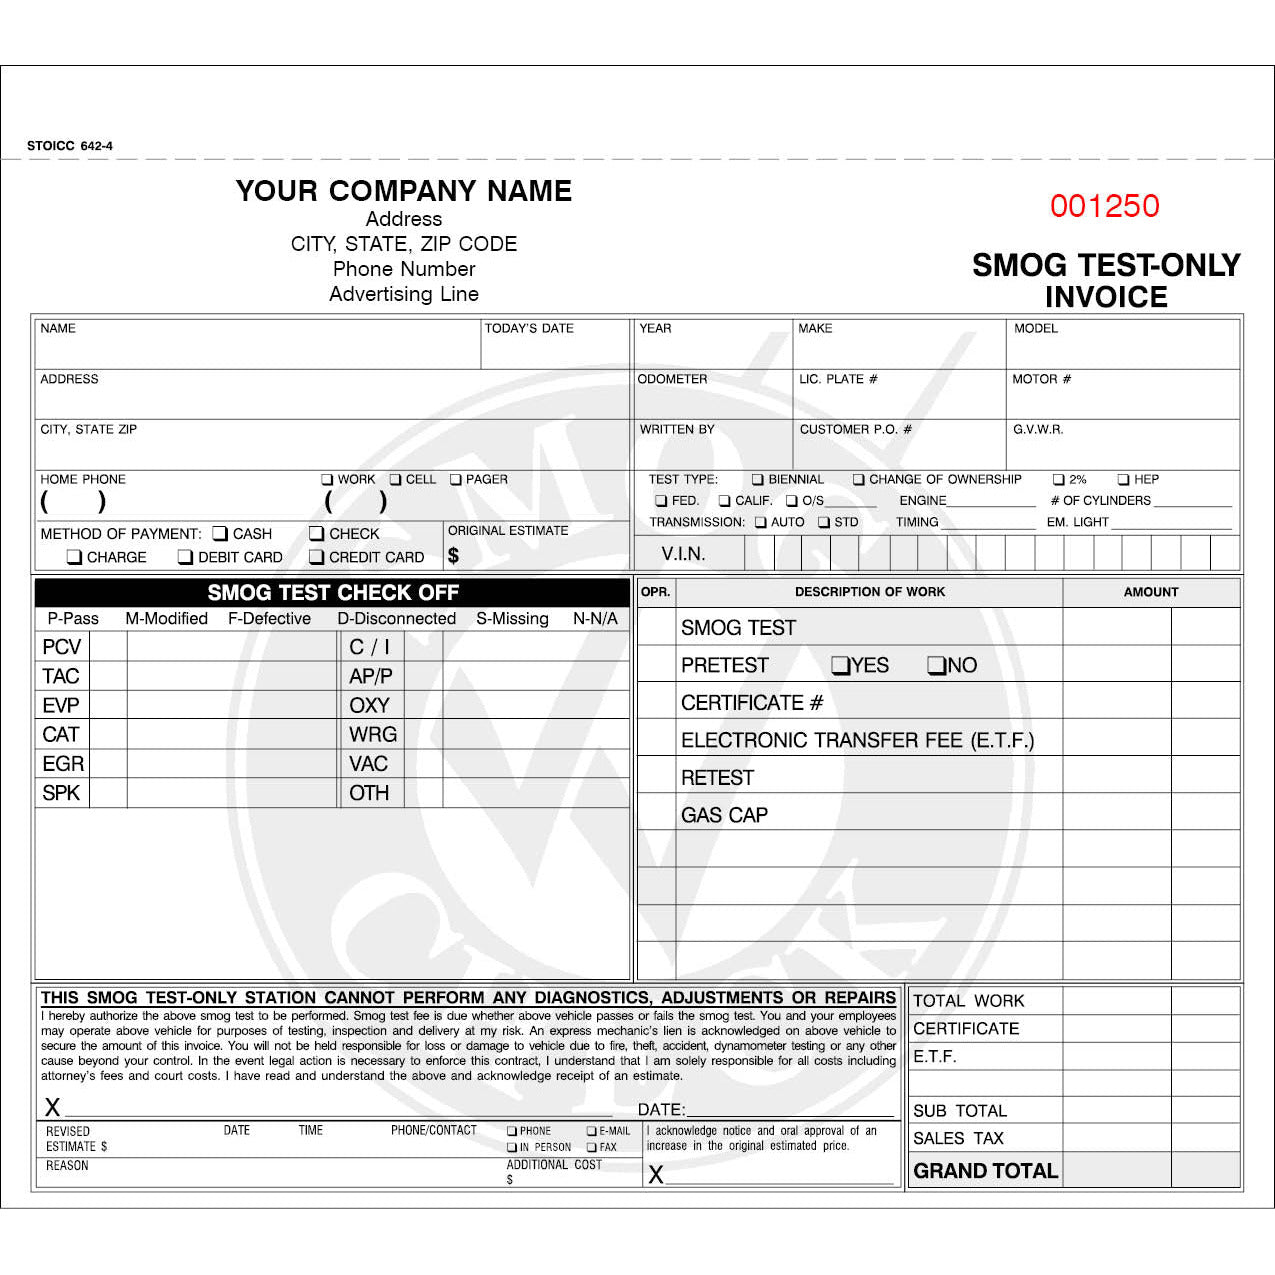 SMOG FORMS Test Only 4 Part Work Order 1000Qty #STOICC-642-4